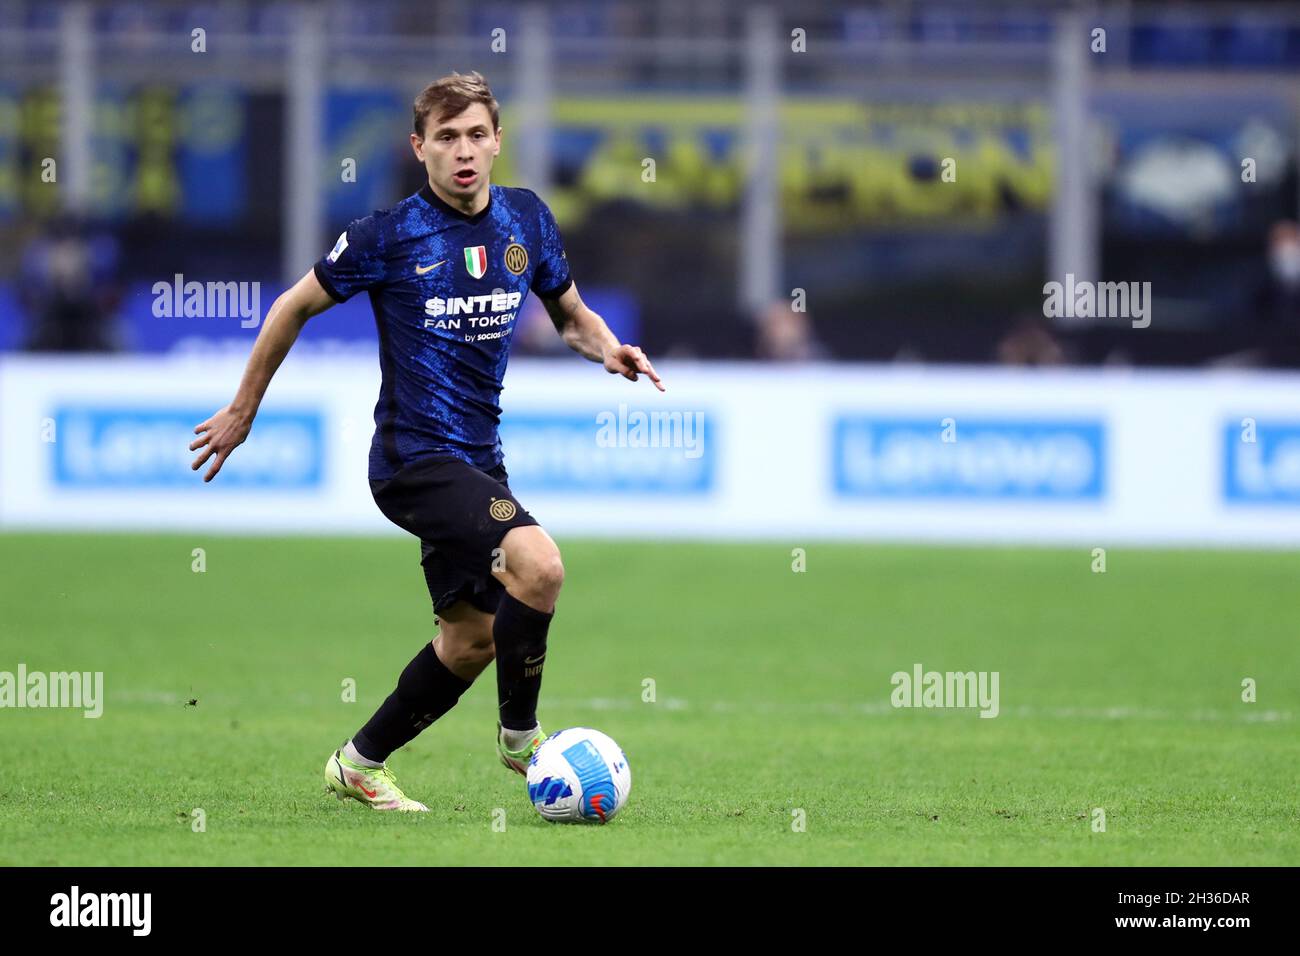 Nicolo Barella of Fc Internazionale  in action during the Serie A match between Fc Internazionale and Juventus Fc. Stock Photo